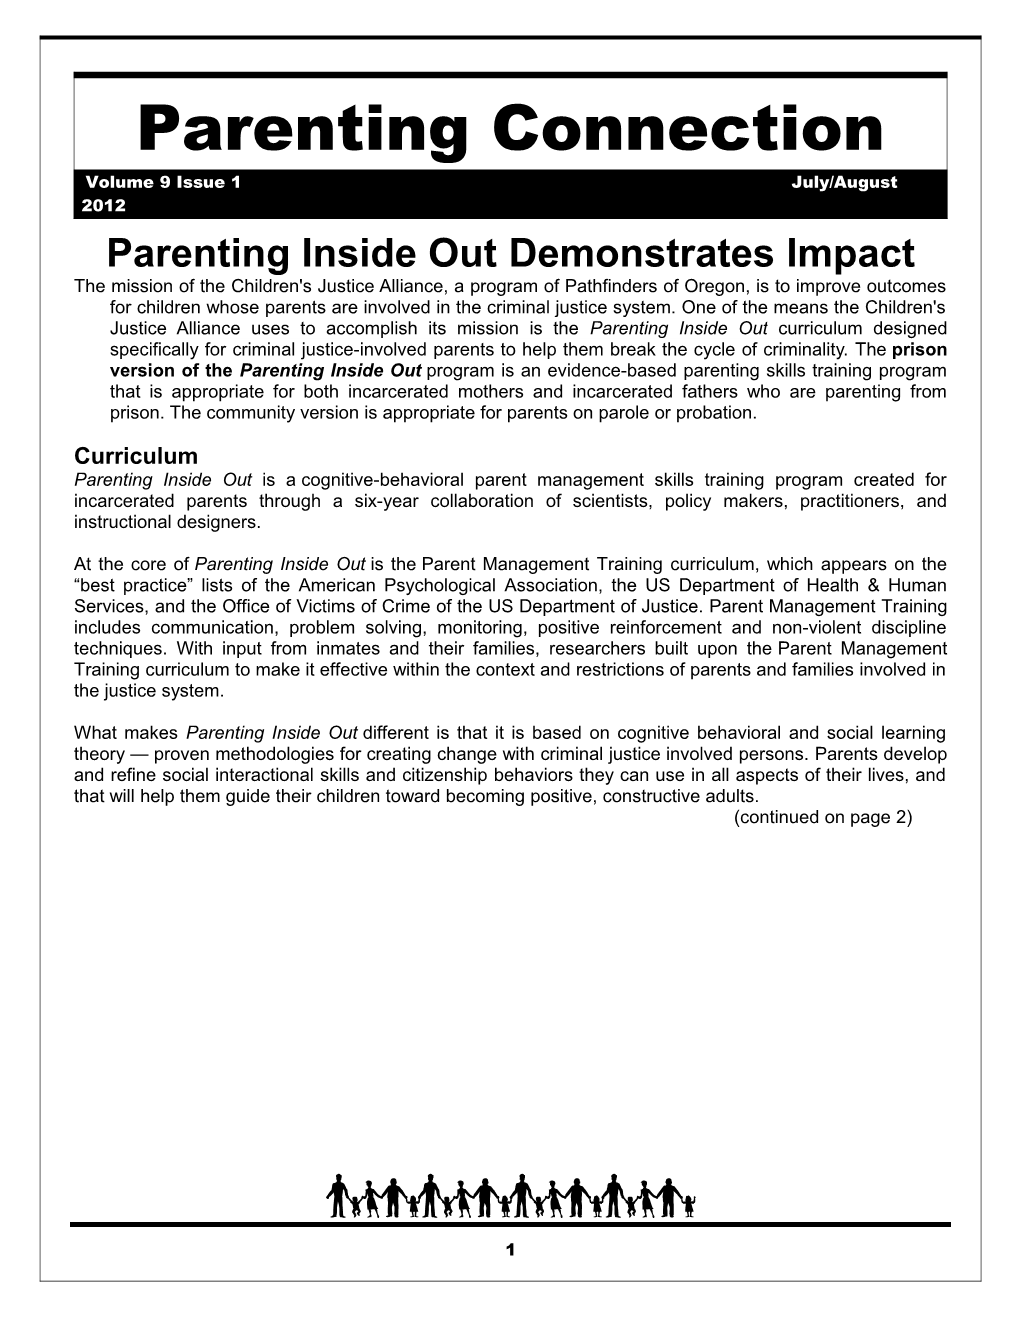 Parenting Inside Outdemonstrates Impact